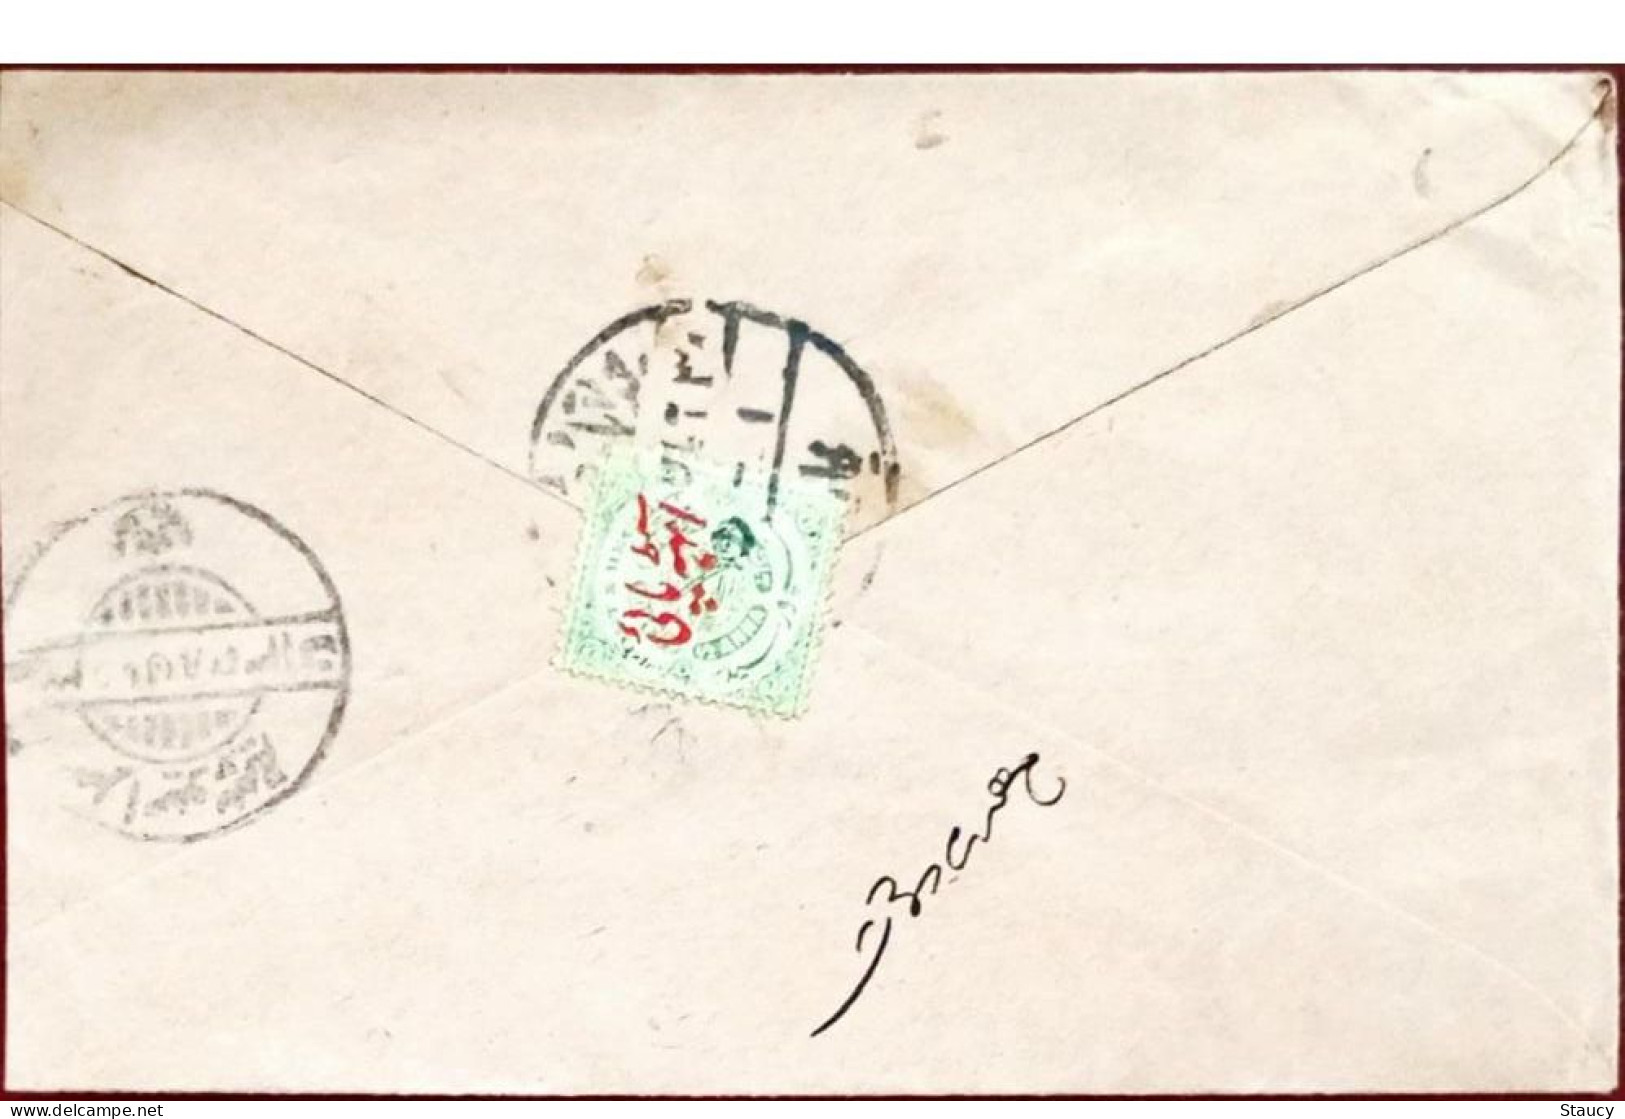 BRITISH INDIA HYDERABAD STATE 8p Overprint On 1/2a Hyderabad COVER, NICE CANC ON FRONT & BACK As Per Scan - Hyderabad